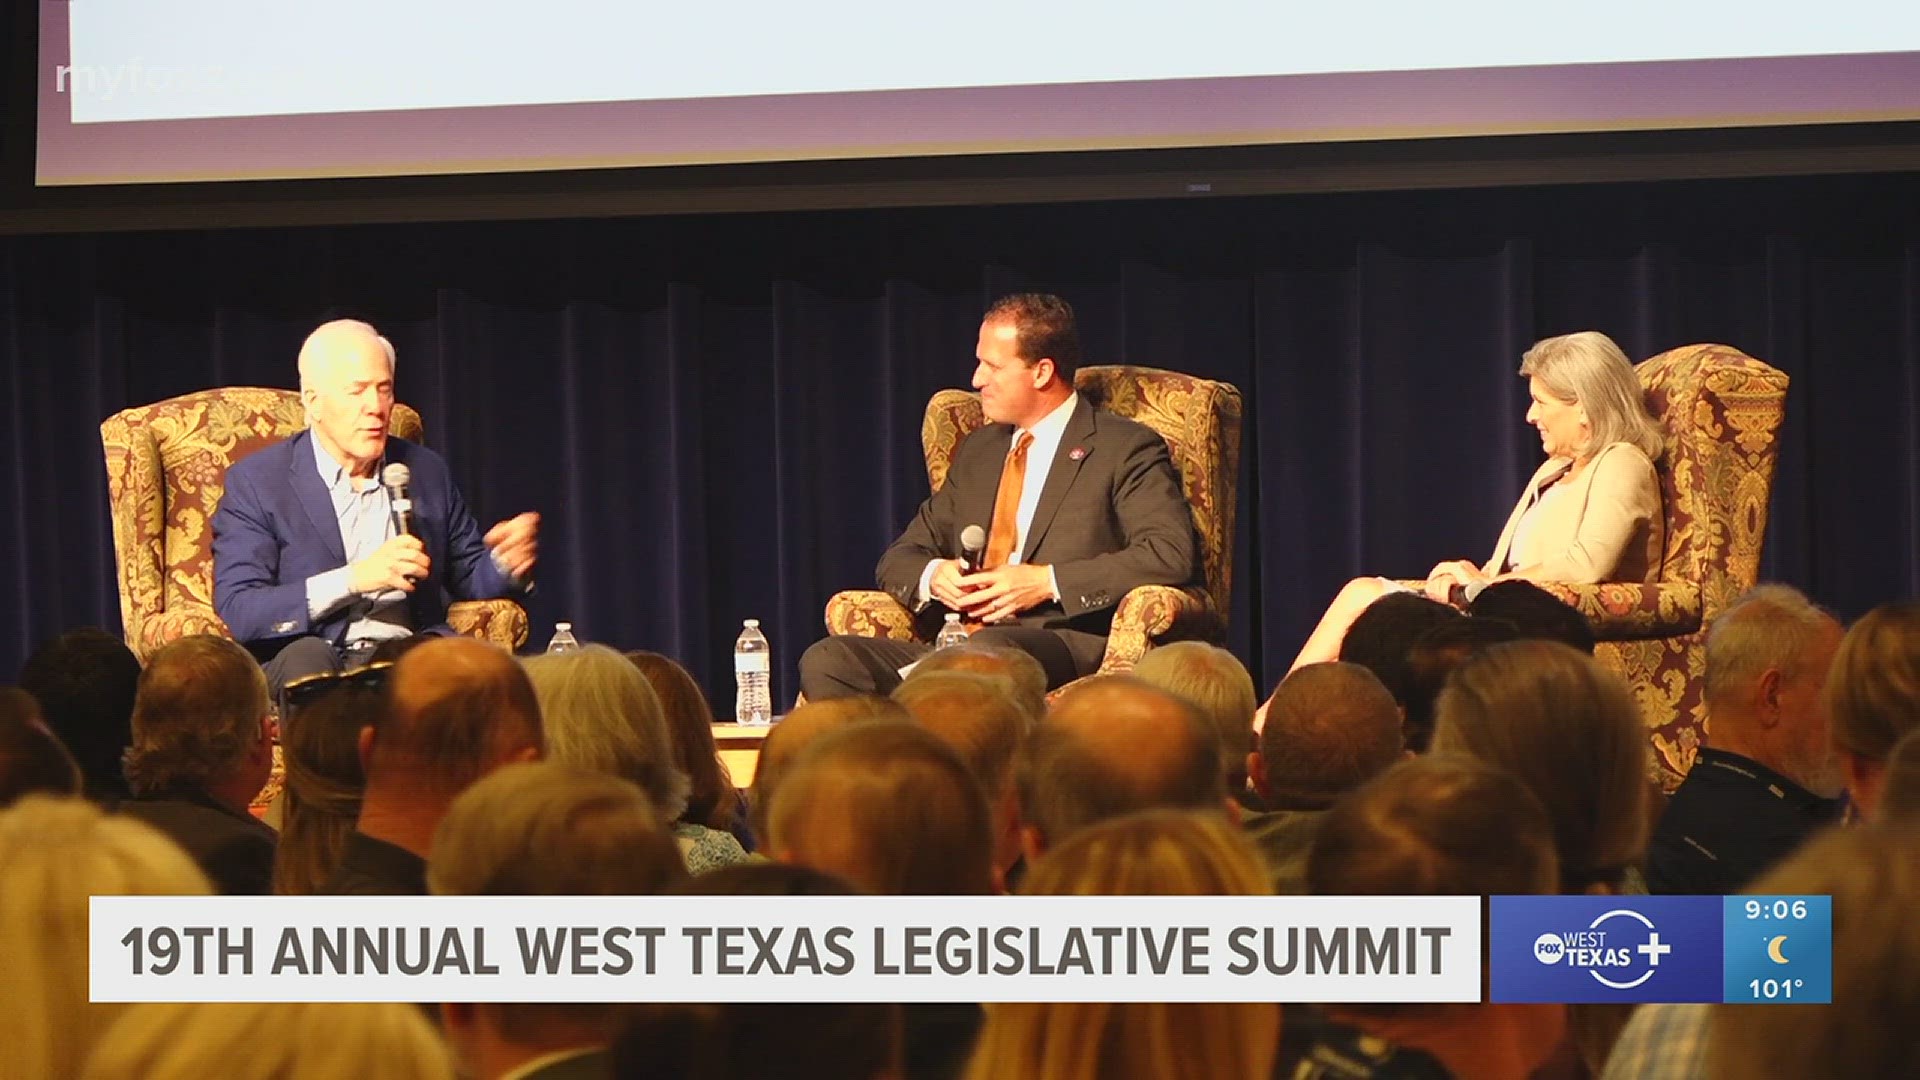 Community members got the opportunity to learn from leaders about the future of West Texas.